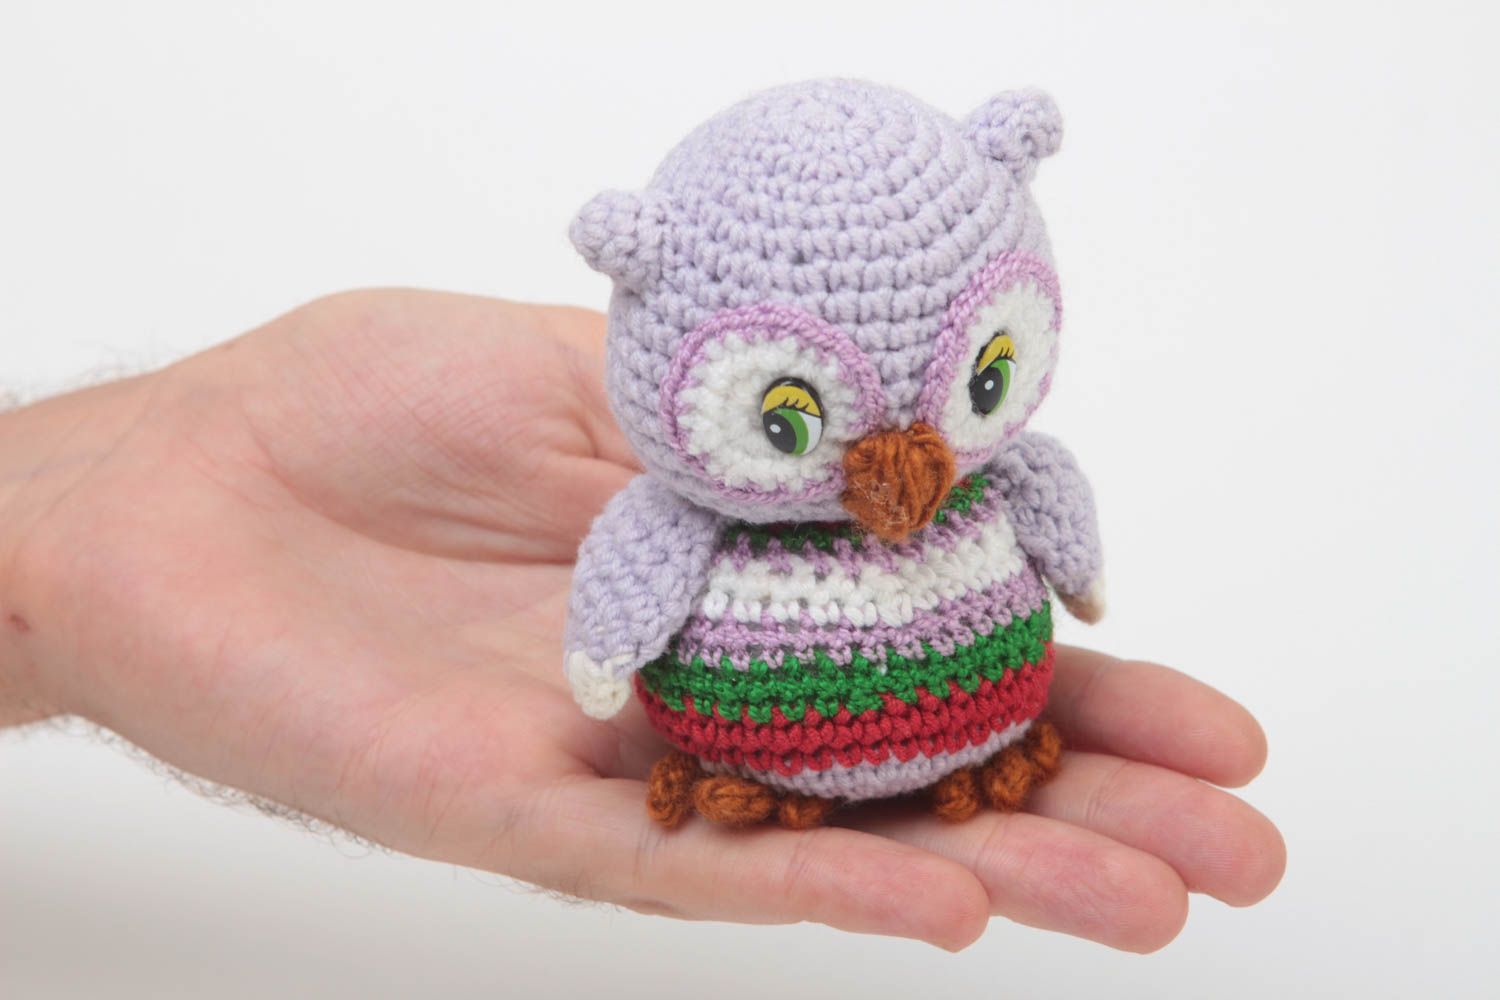 Unusual handmade soft toy homemade stuffed toy crochet toy for kids gift ideas photo 5